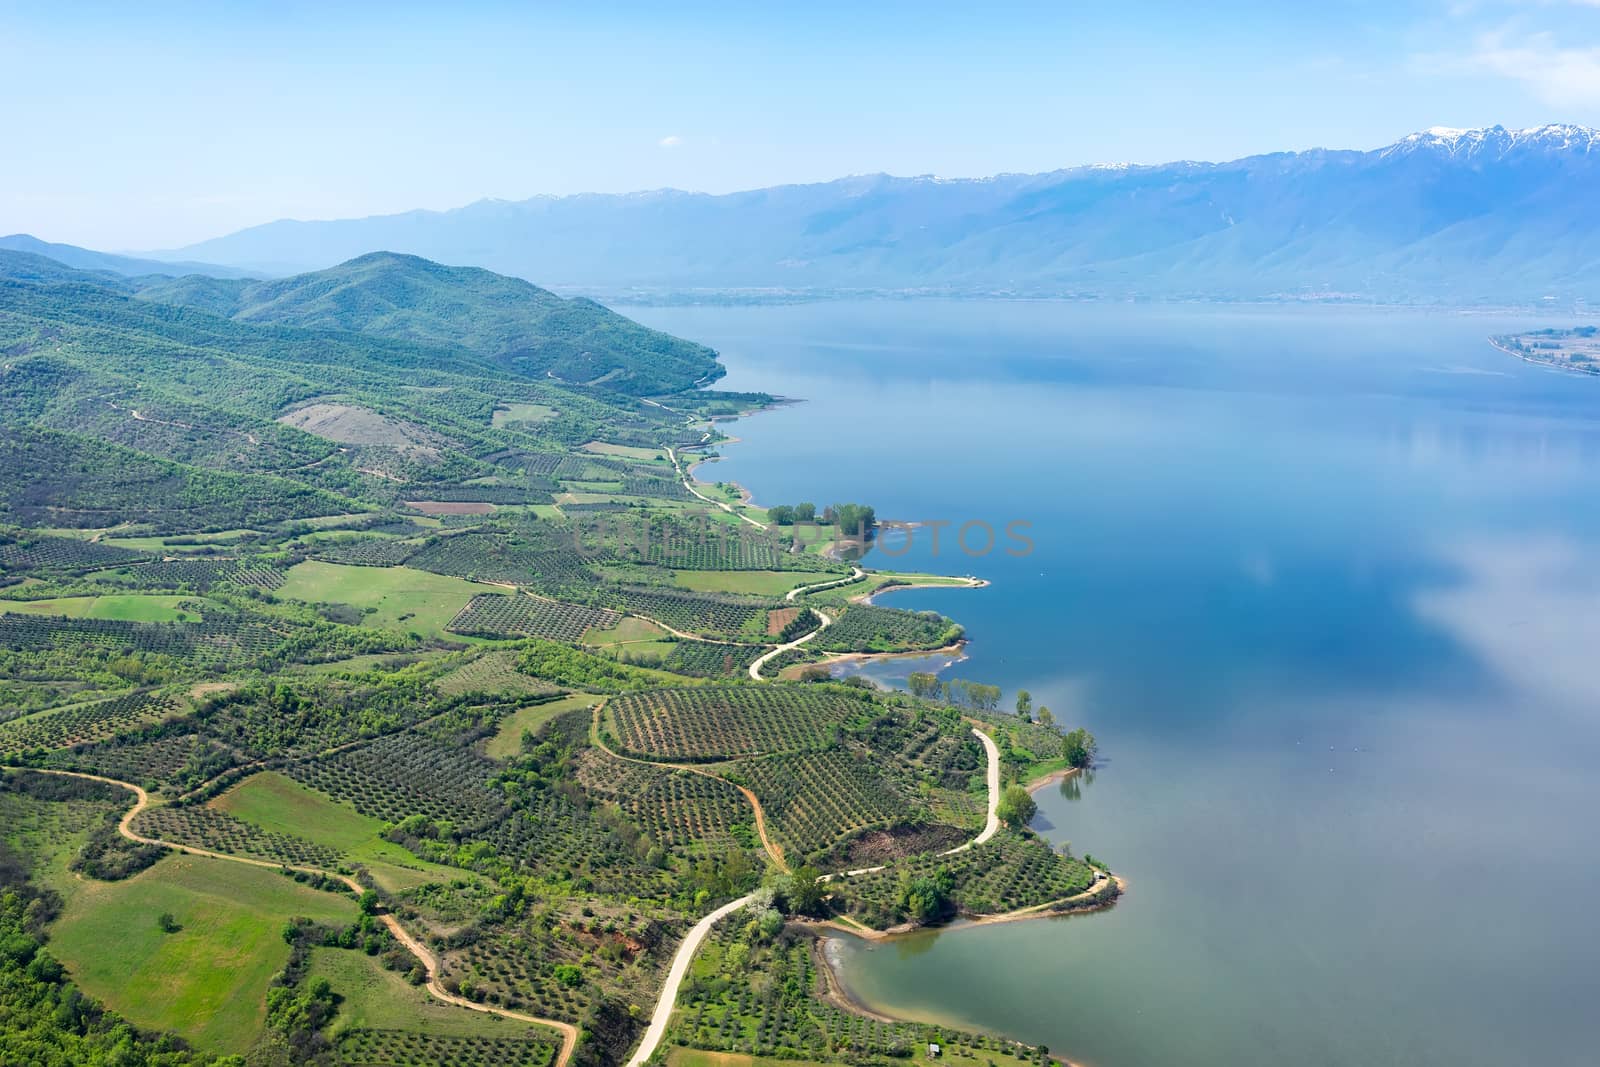 Aerial view of the artificial lake Kerkini at the north Greece